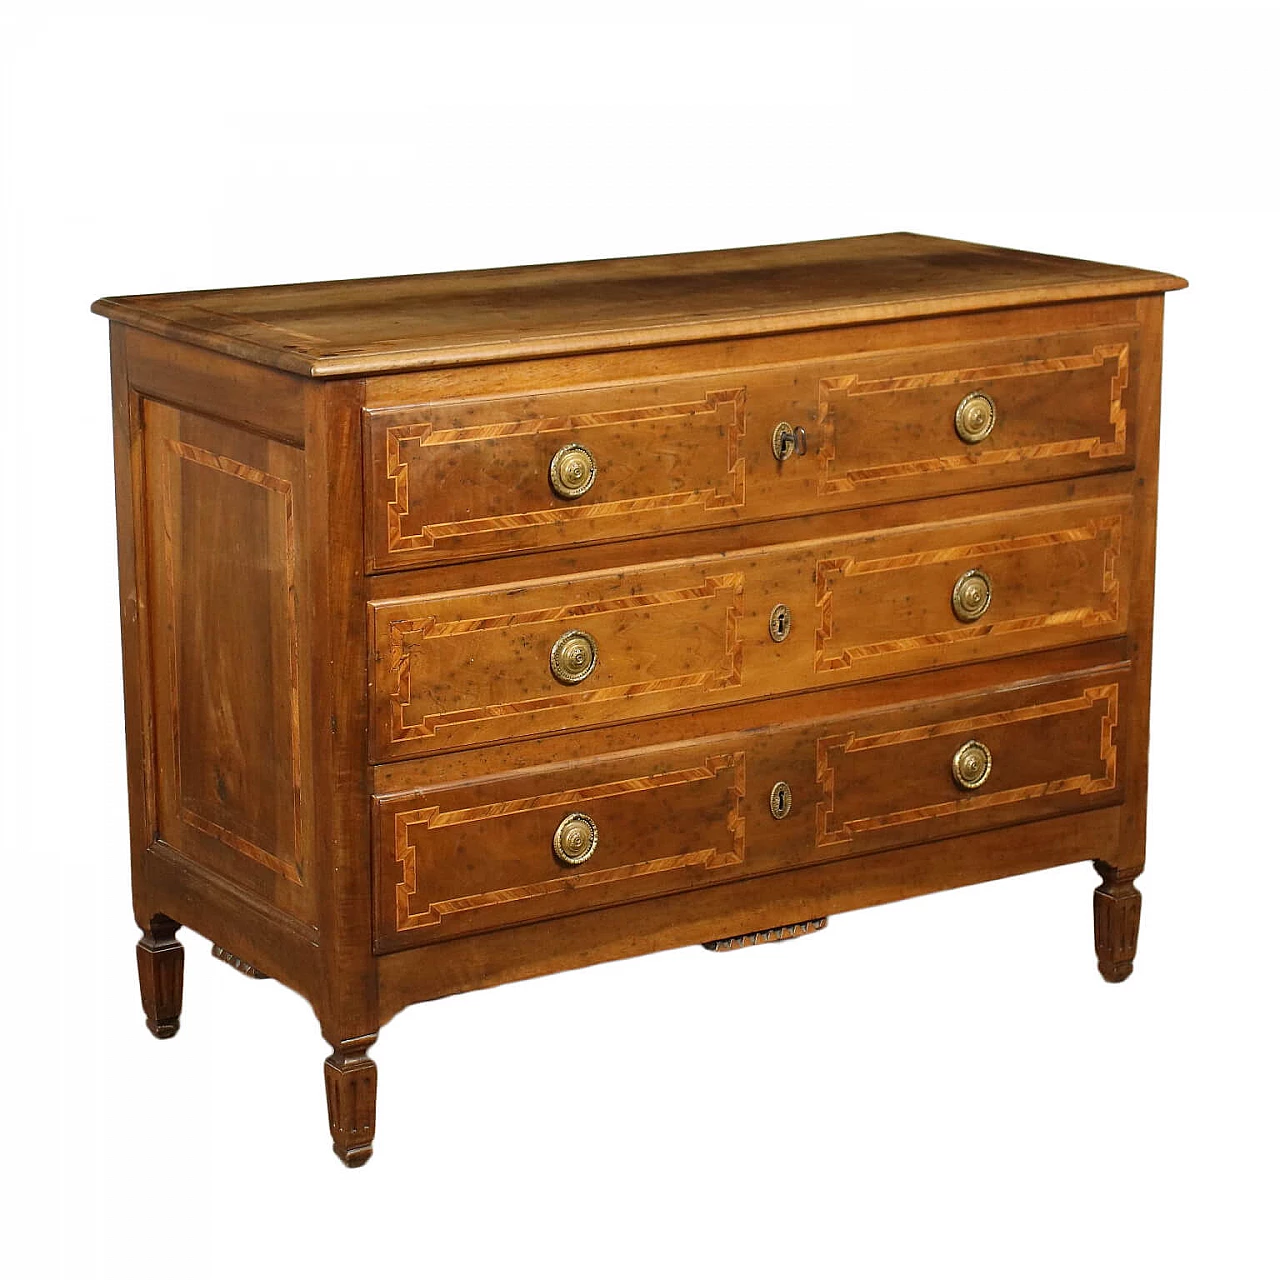 Neoclassical chest of drawers with maple decoration, 18th century 1454375